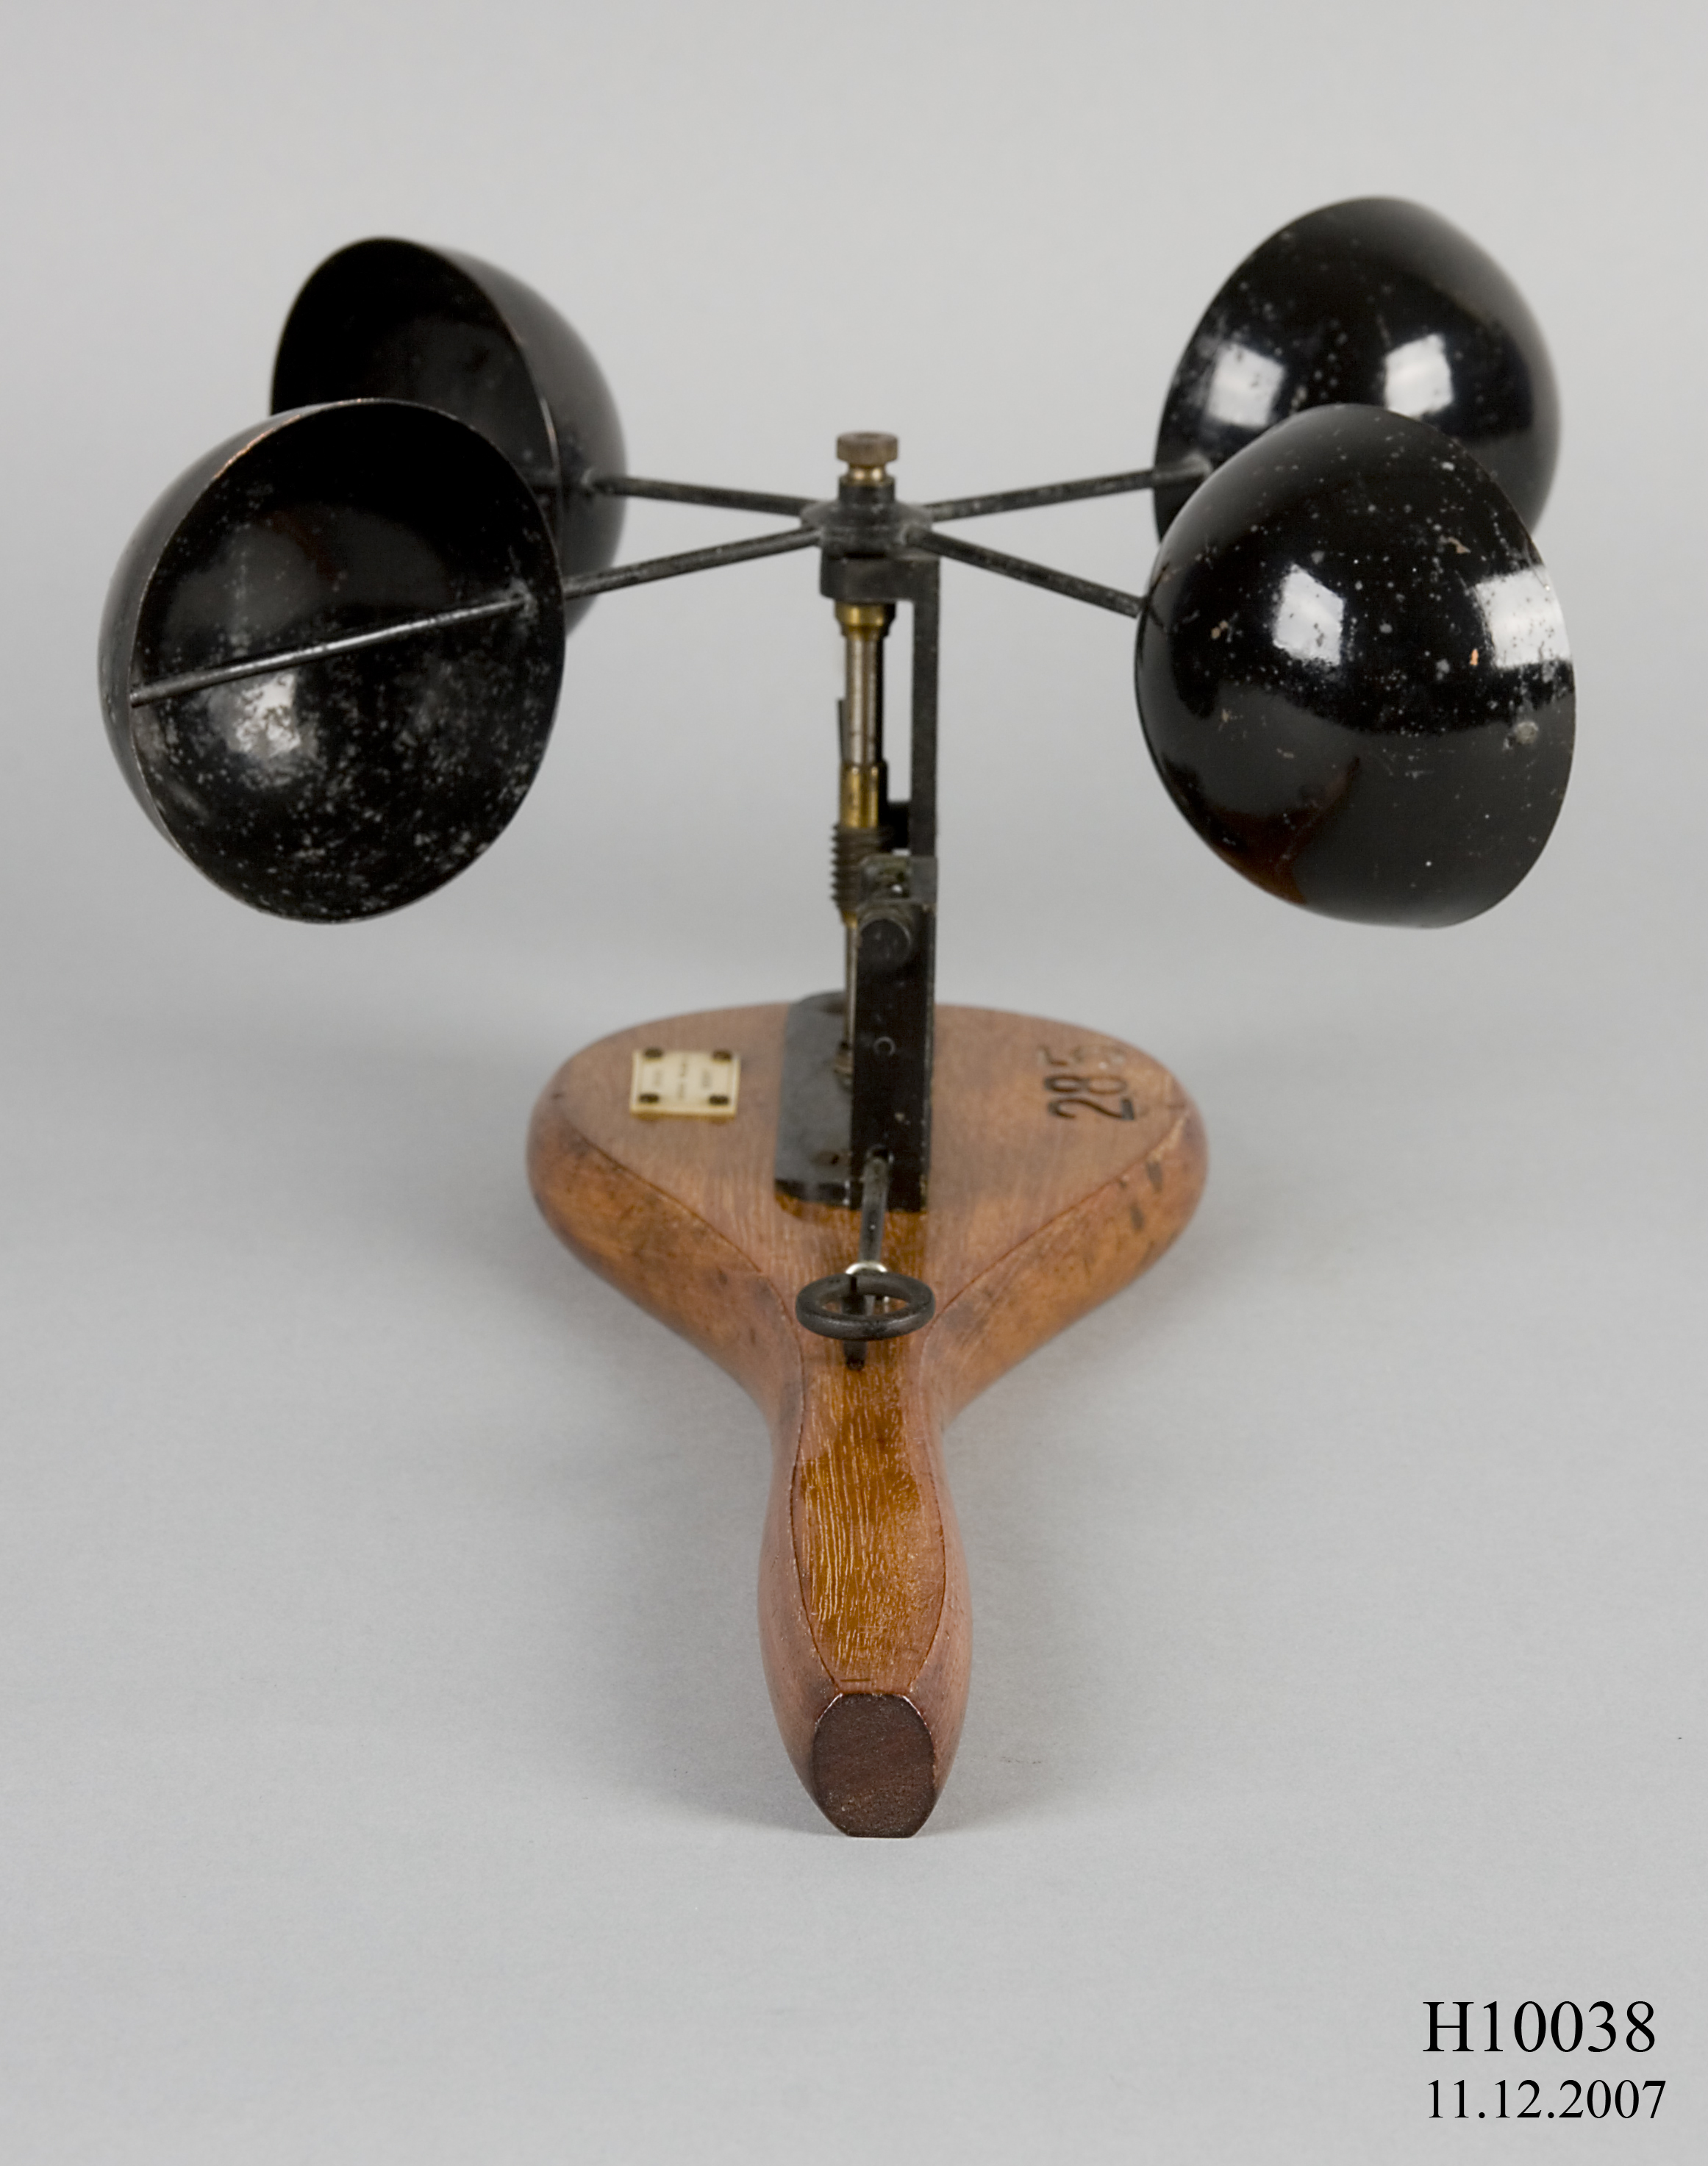 A hand held Robinson's anemometer